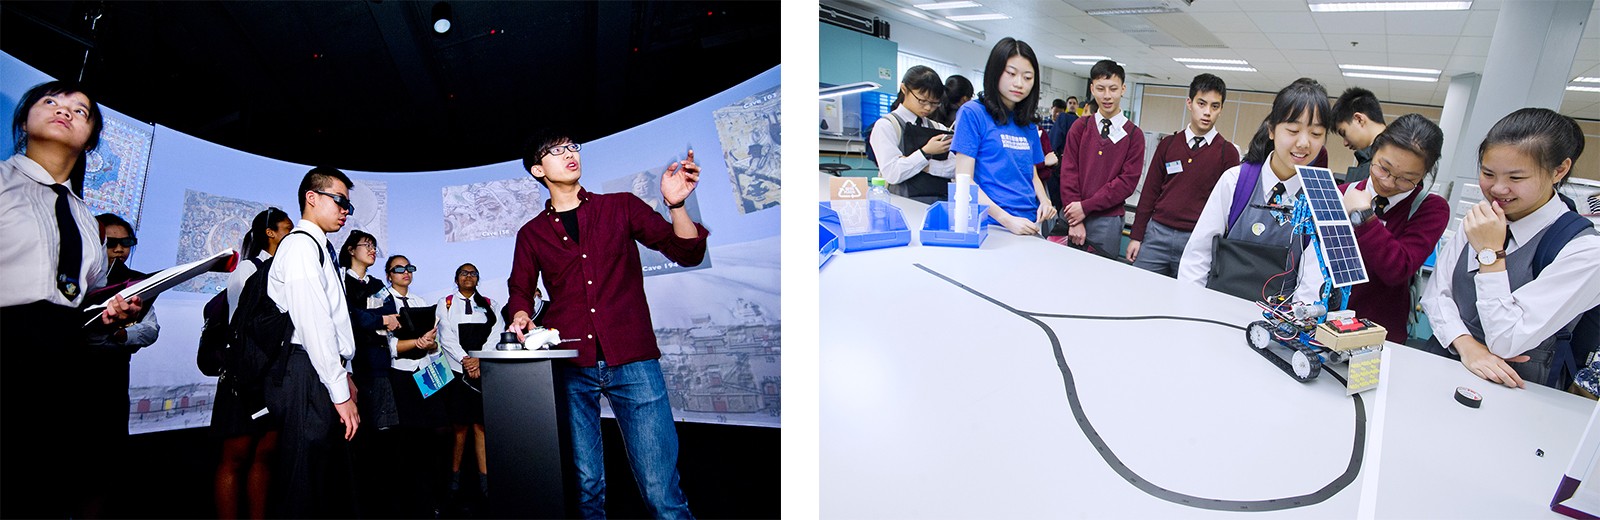 Participants get a taste of CityU’s innovative learning environment while touring campus.